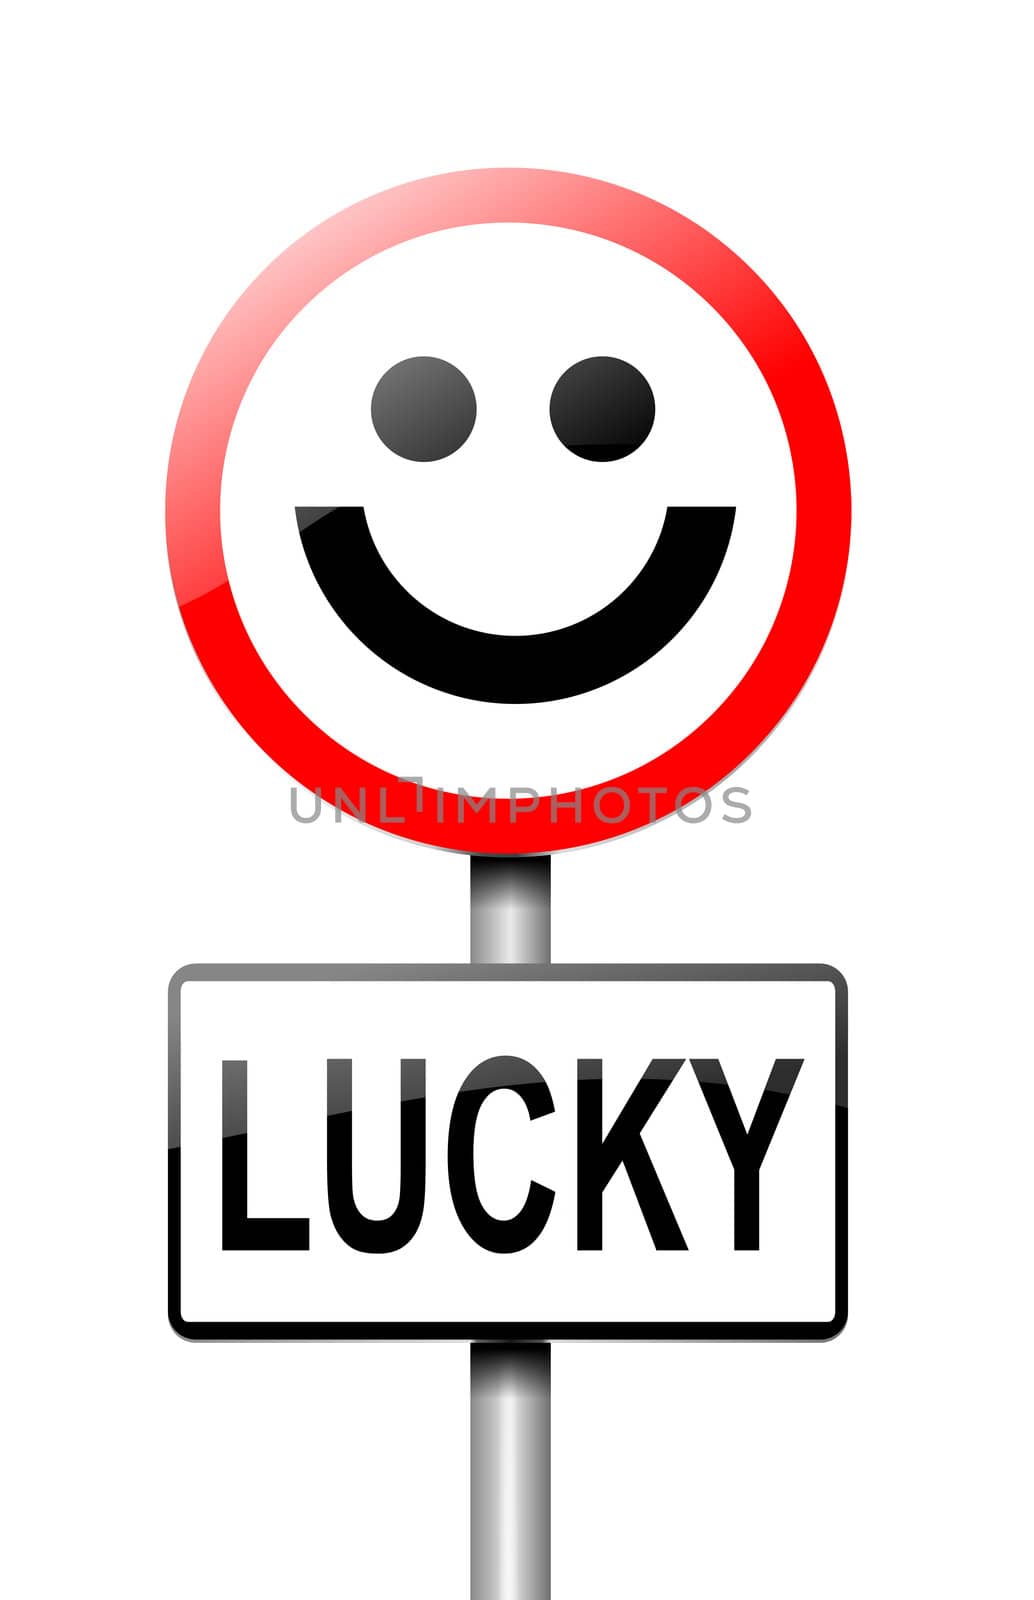 Illustration depicting a sign with a lucky concept.